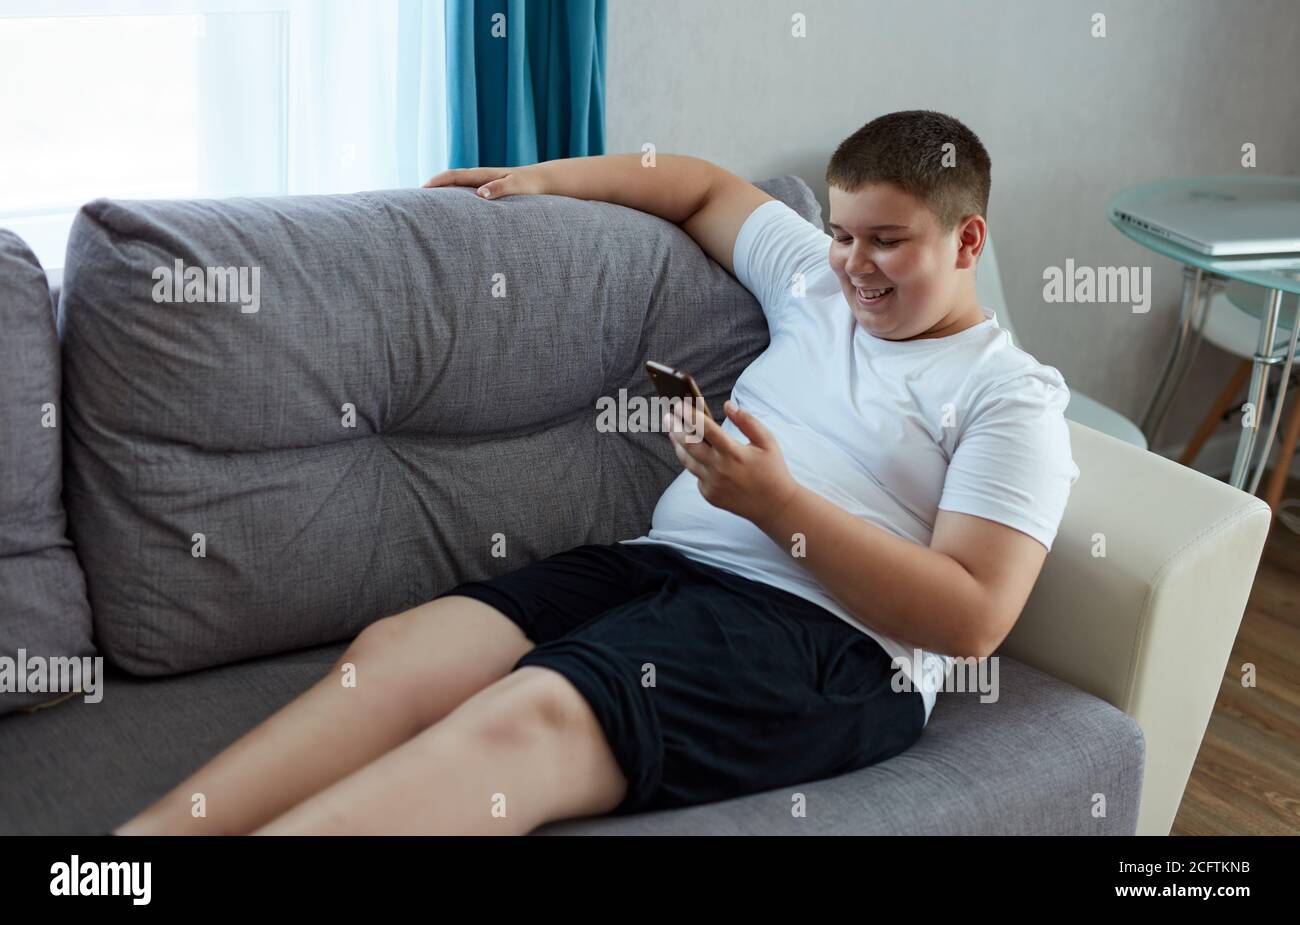 young fat boy chatting with friend, sit with mobile phone, teen boy in domestic wear sits on sofa and look at smartphone, smile. leisure time Stock Photo